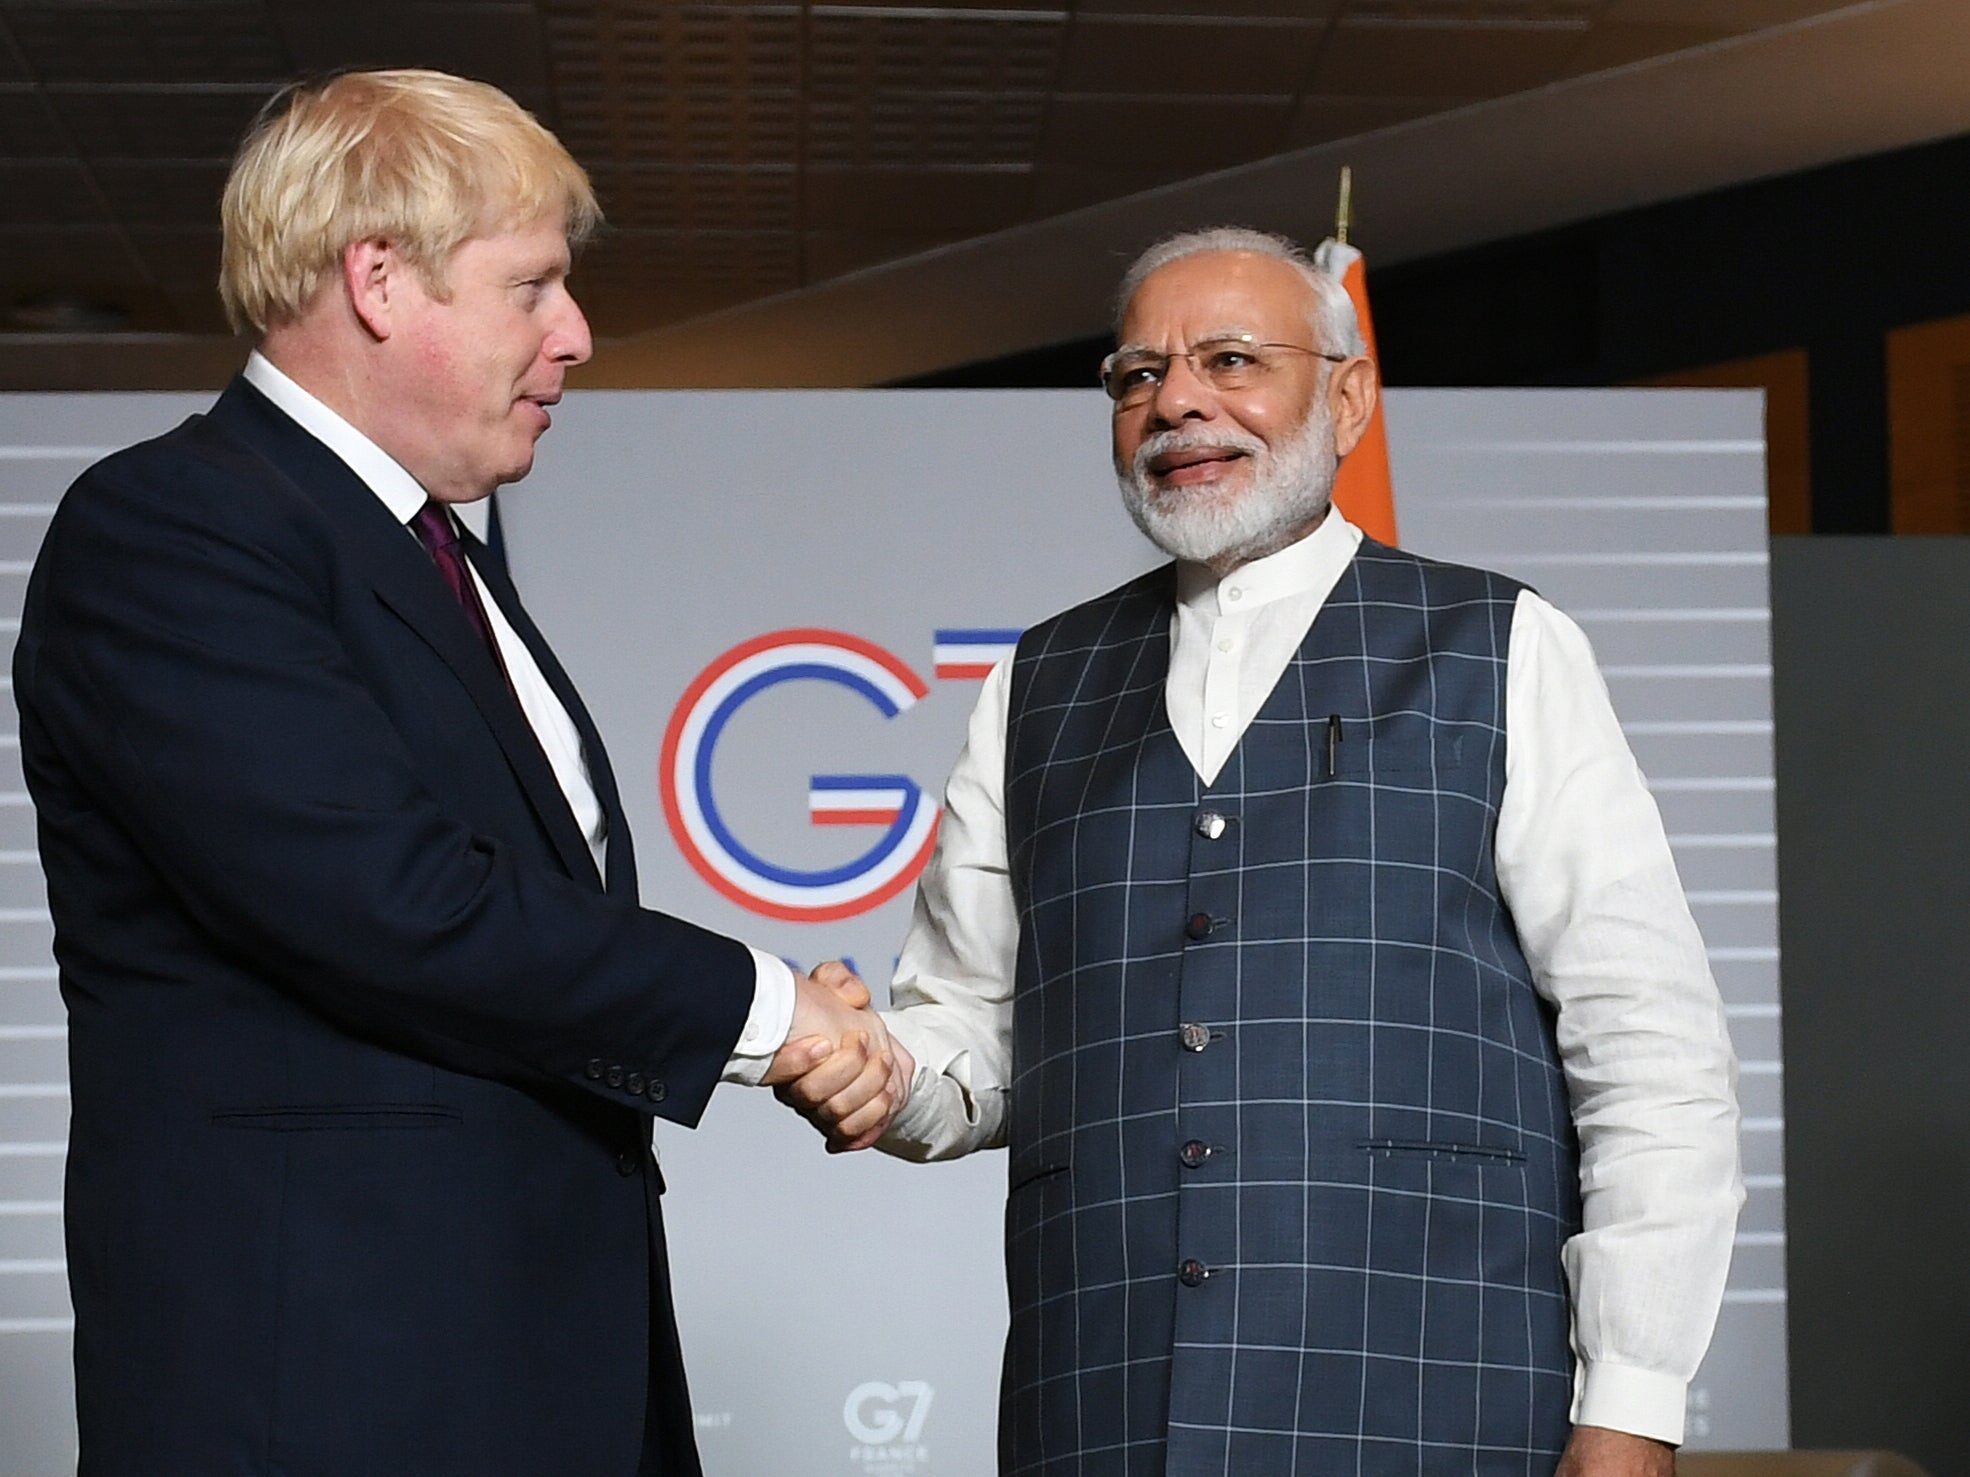 Boris Johnson meets his Indian counterpart Narendra Modi for bilateral talks during the August 2019 G7 summit in Biarritz